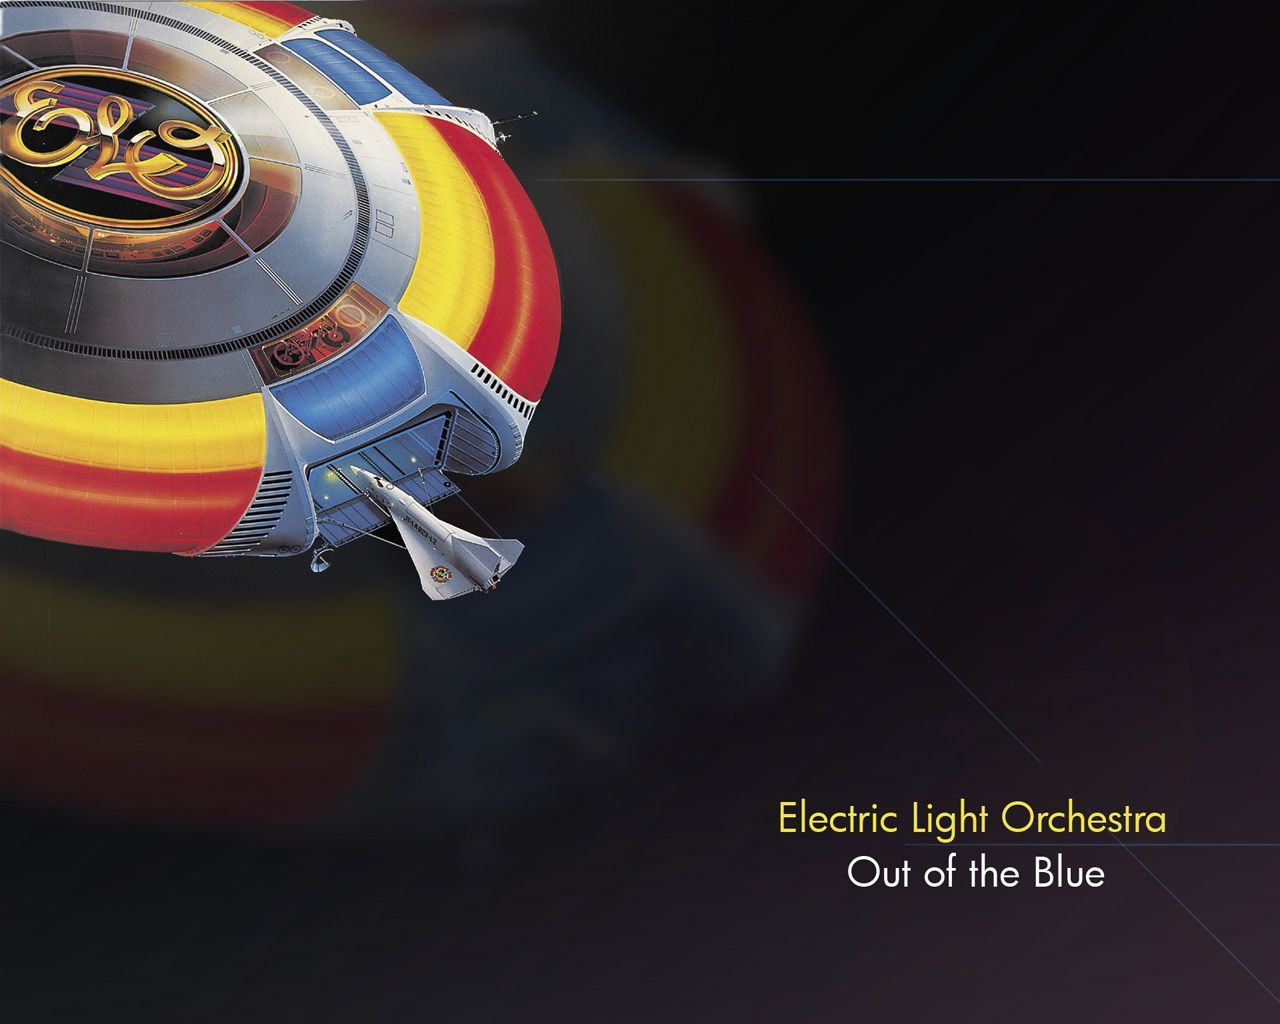 Electric Light Orchestra. Electric lighter